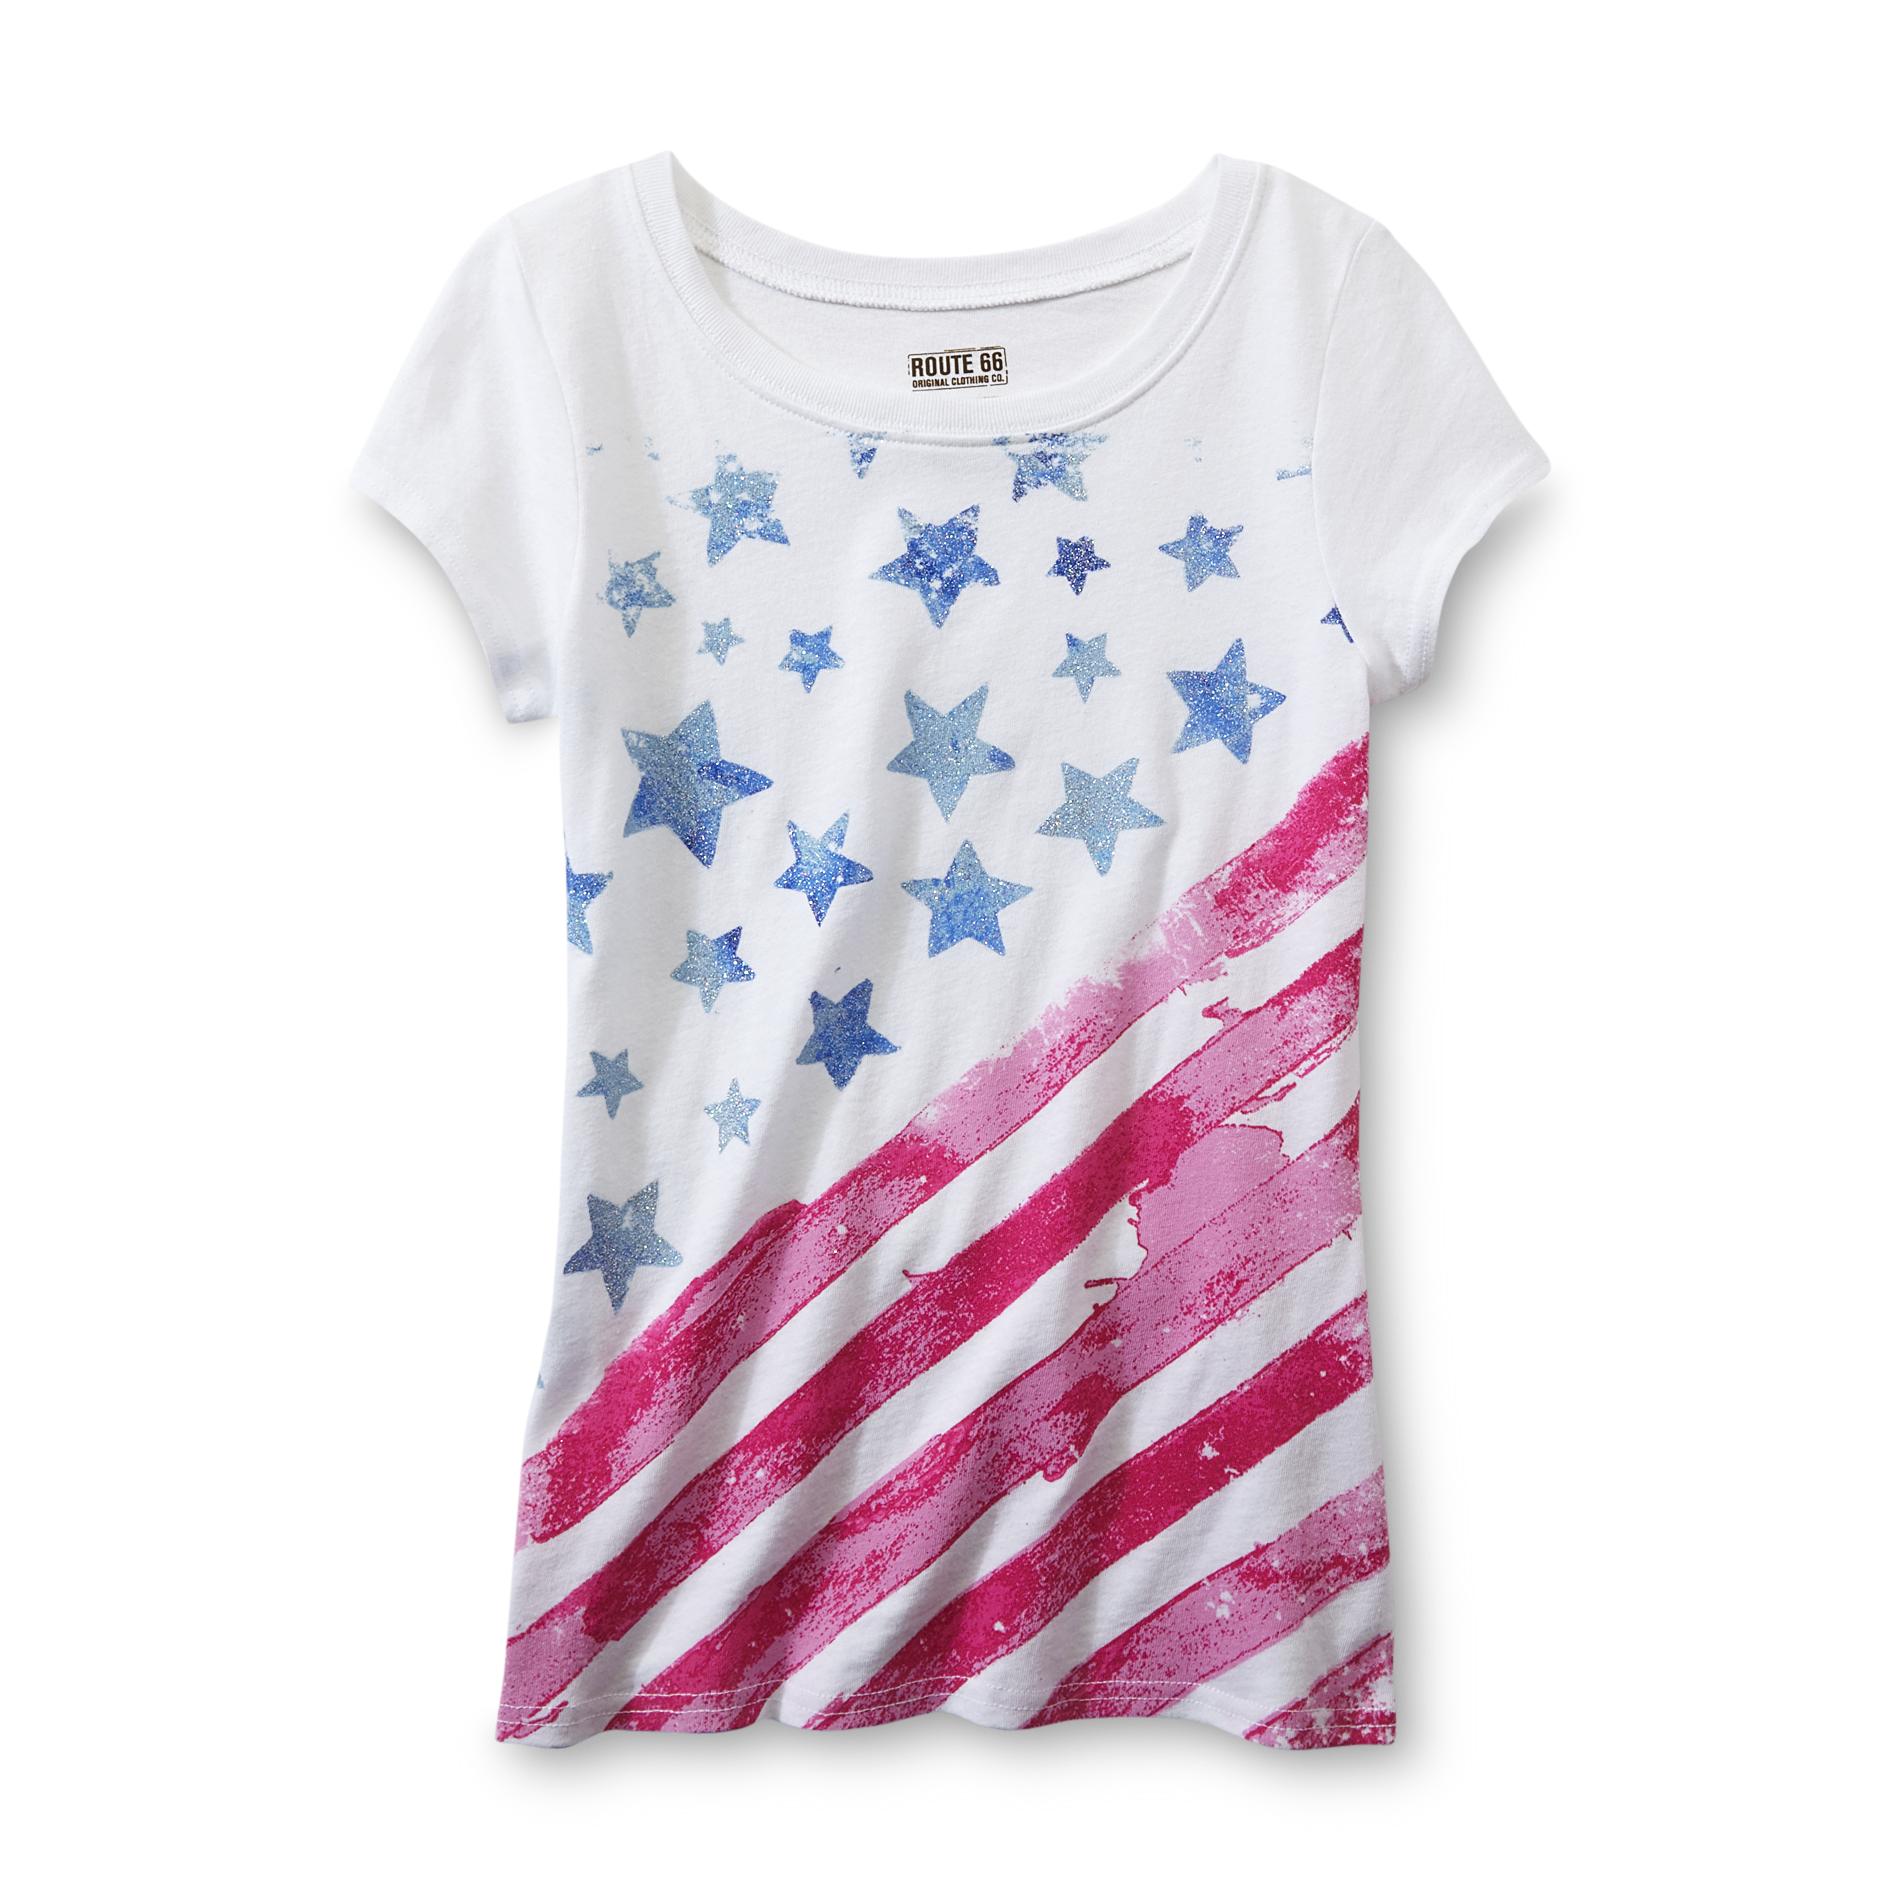 Route 66 Girl's Graphic T-Shirt - Stars & Stripes